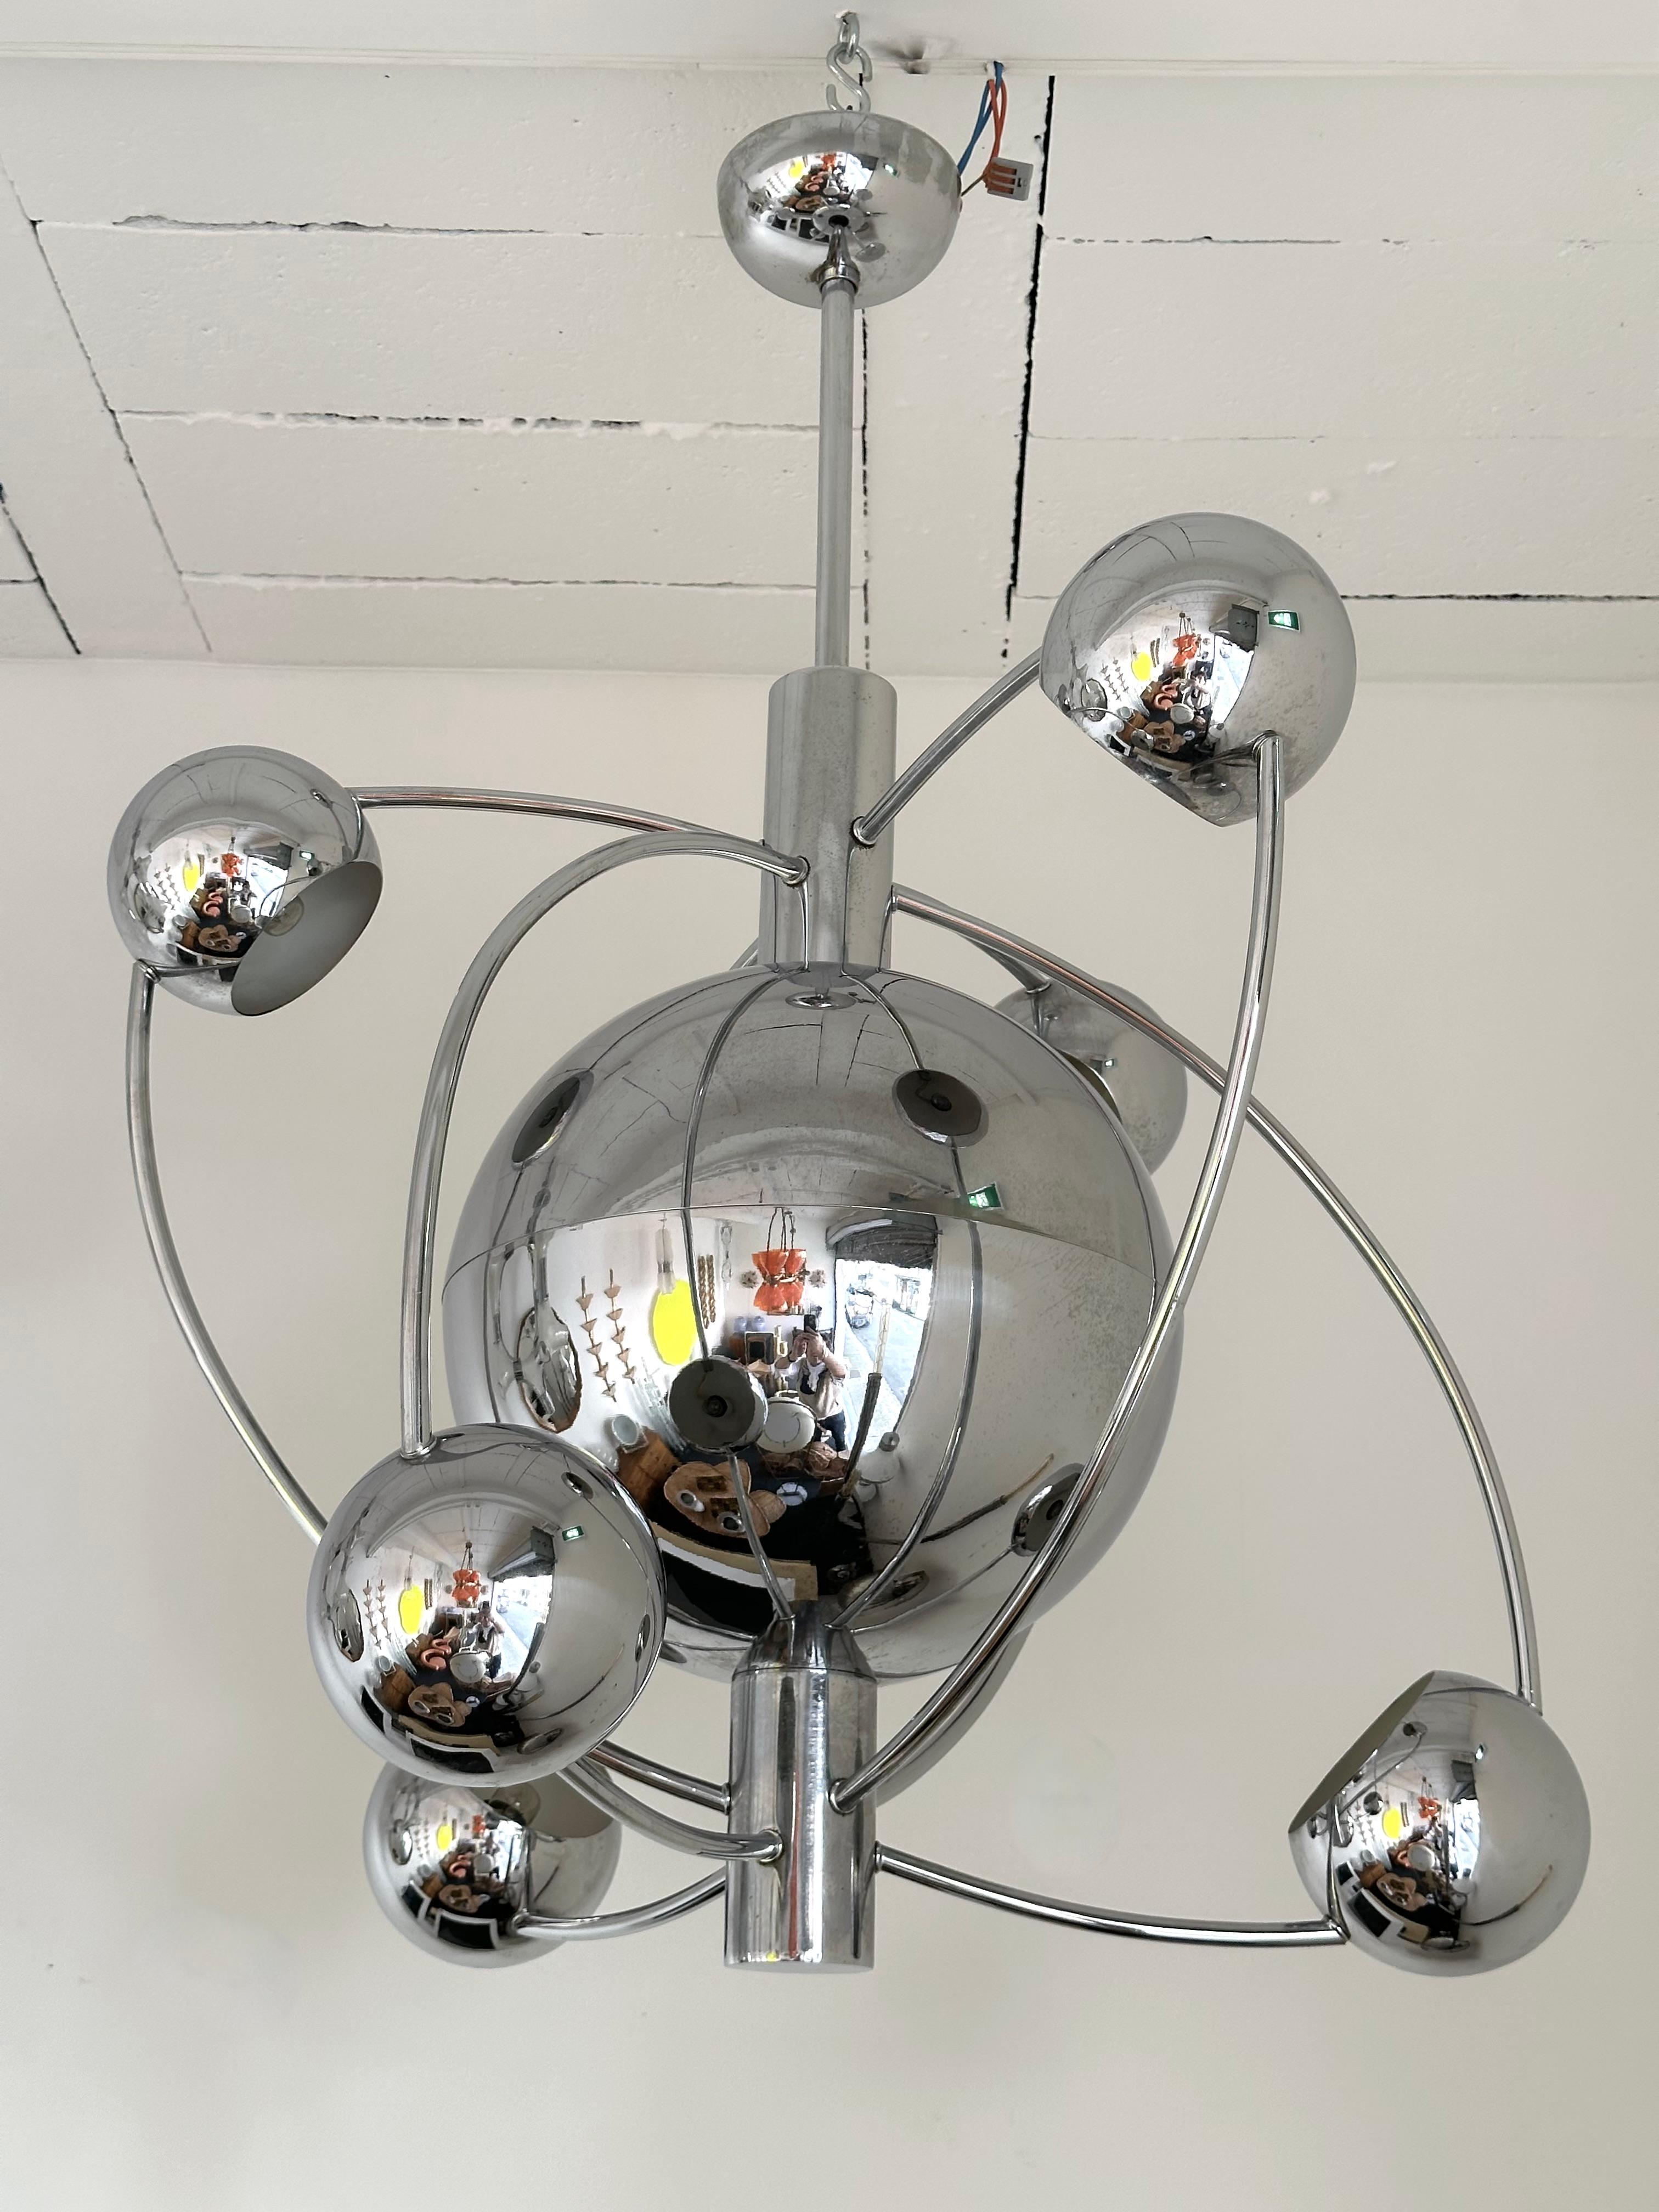 Astro satellite sputnik chandelier ceiling pendant light lightning lamp in chrome metal, six-point of light around the central sphere, design attributed to the editor manufacturer Reggiani. An Italian design typical of the Mid-Century Modern Space